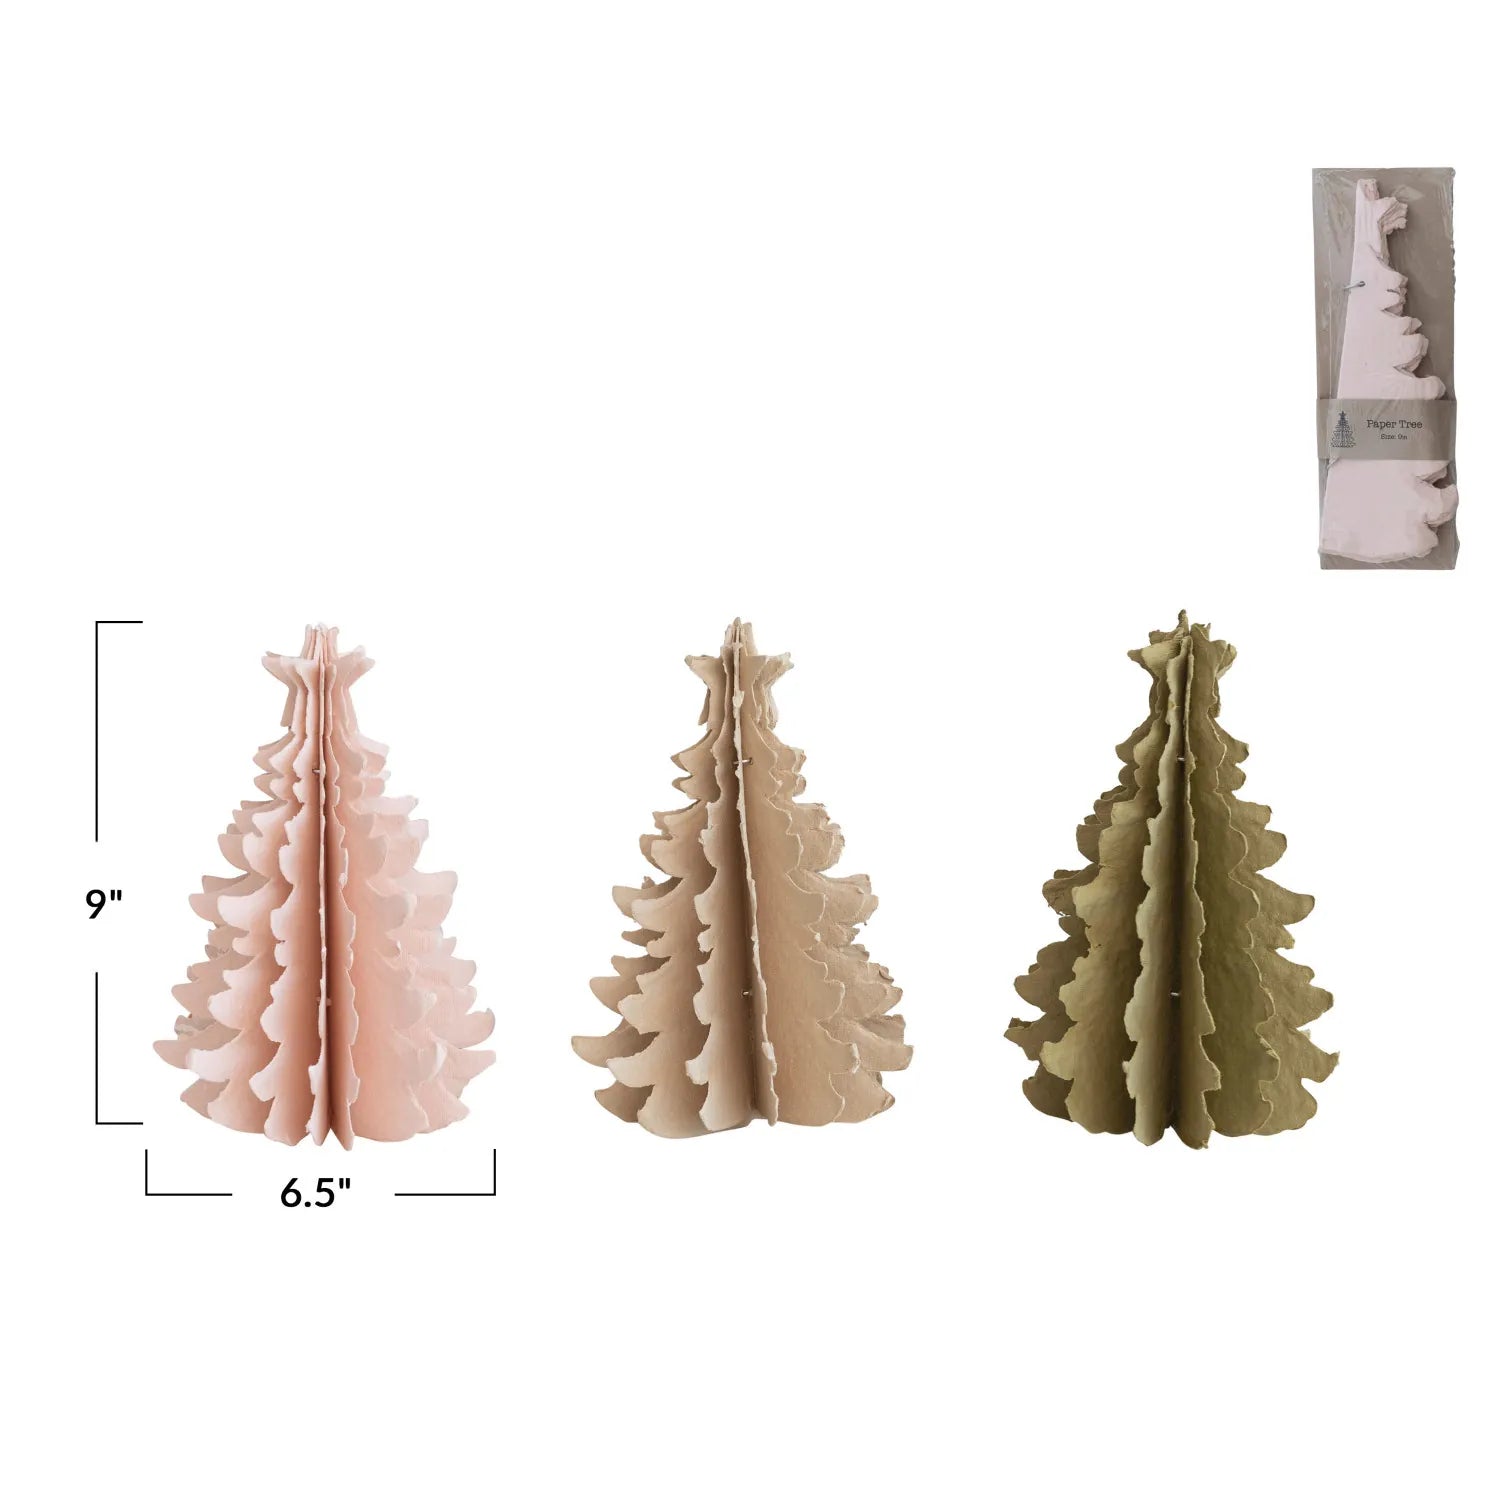 Handmade folding paper tree measurements are 9" high by 6.5" wide. 